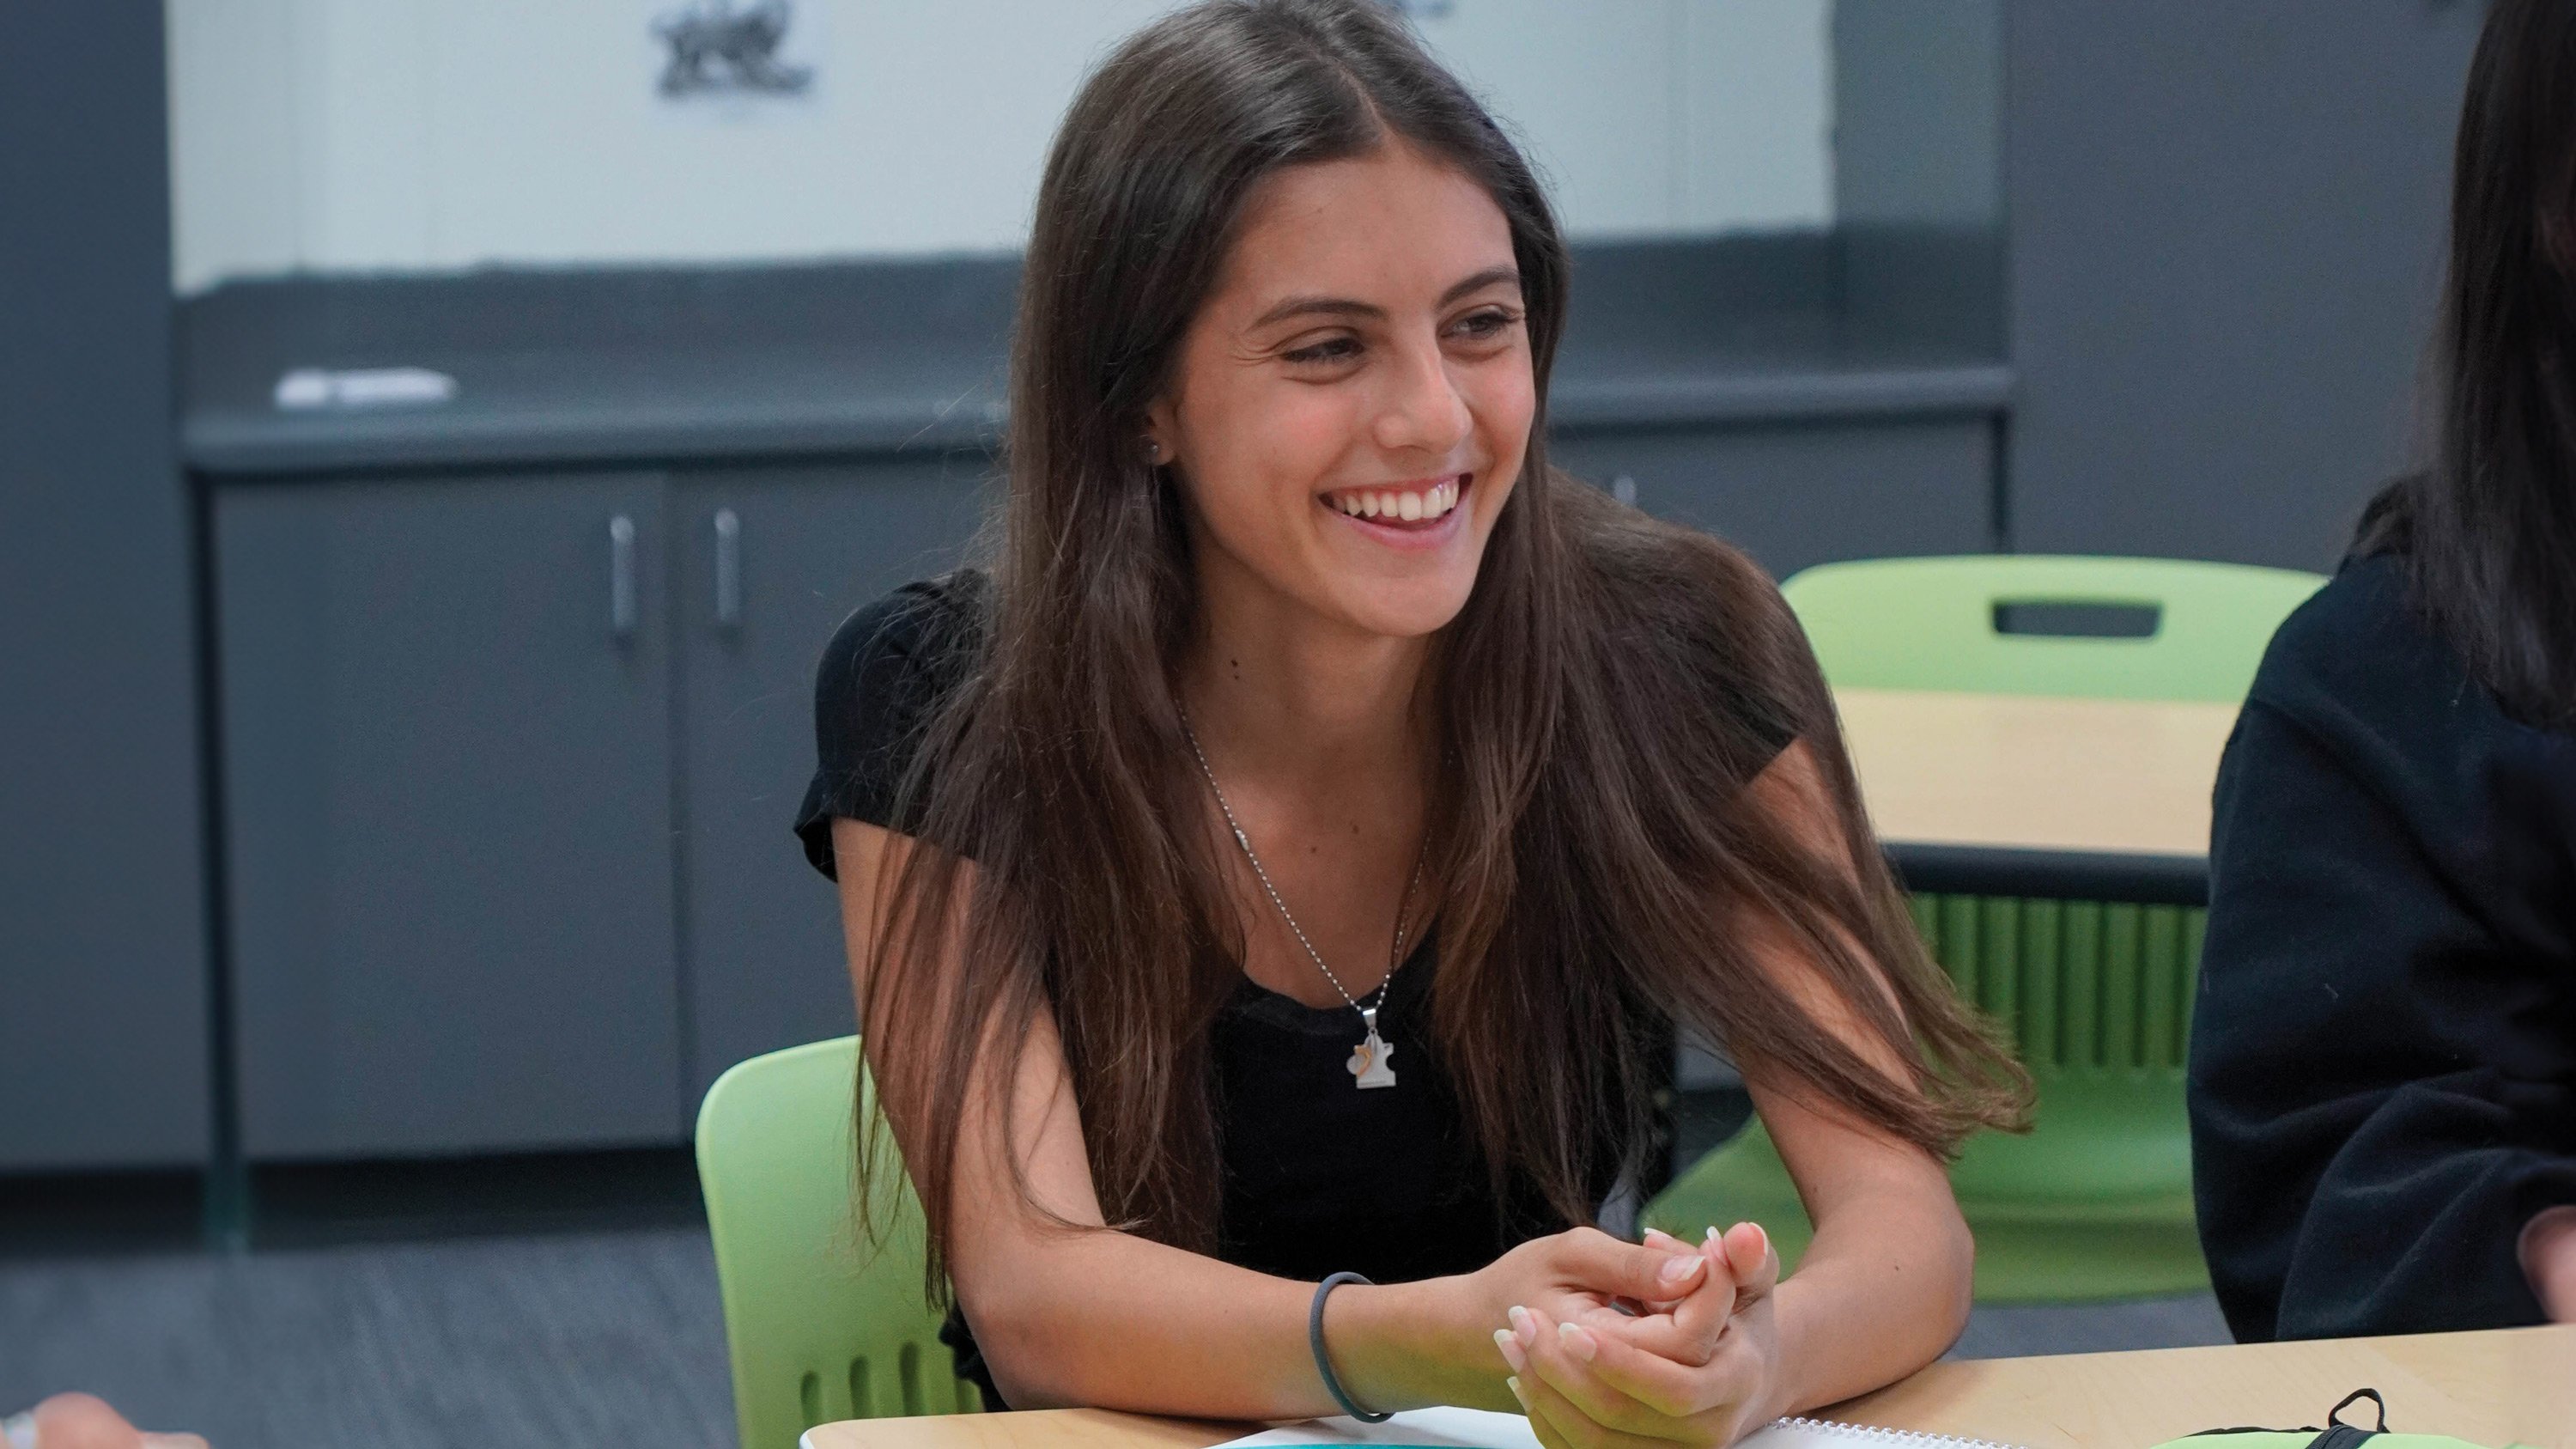 A female student in class smiling during a class discussion.